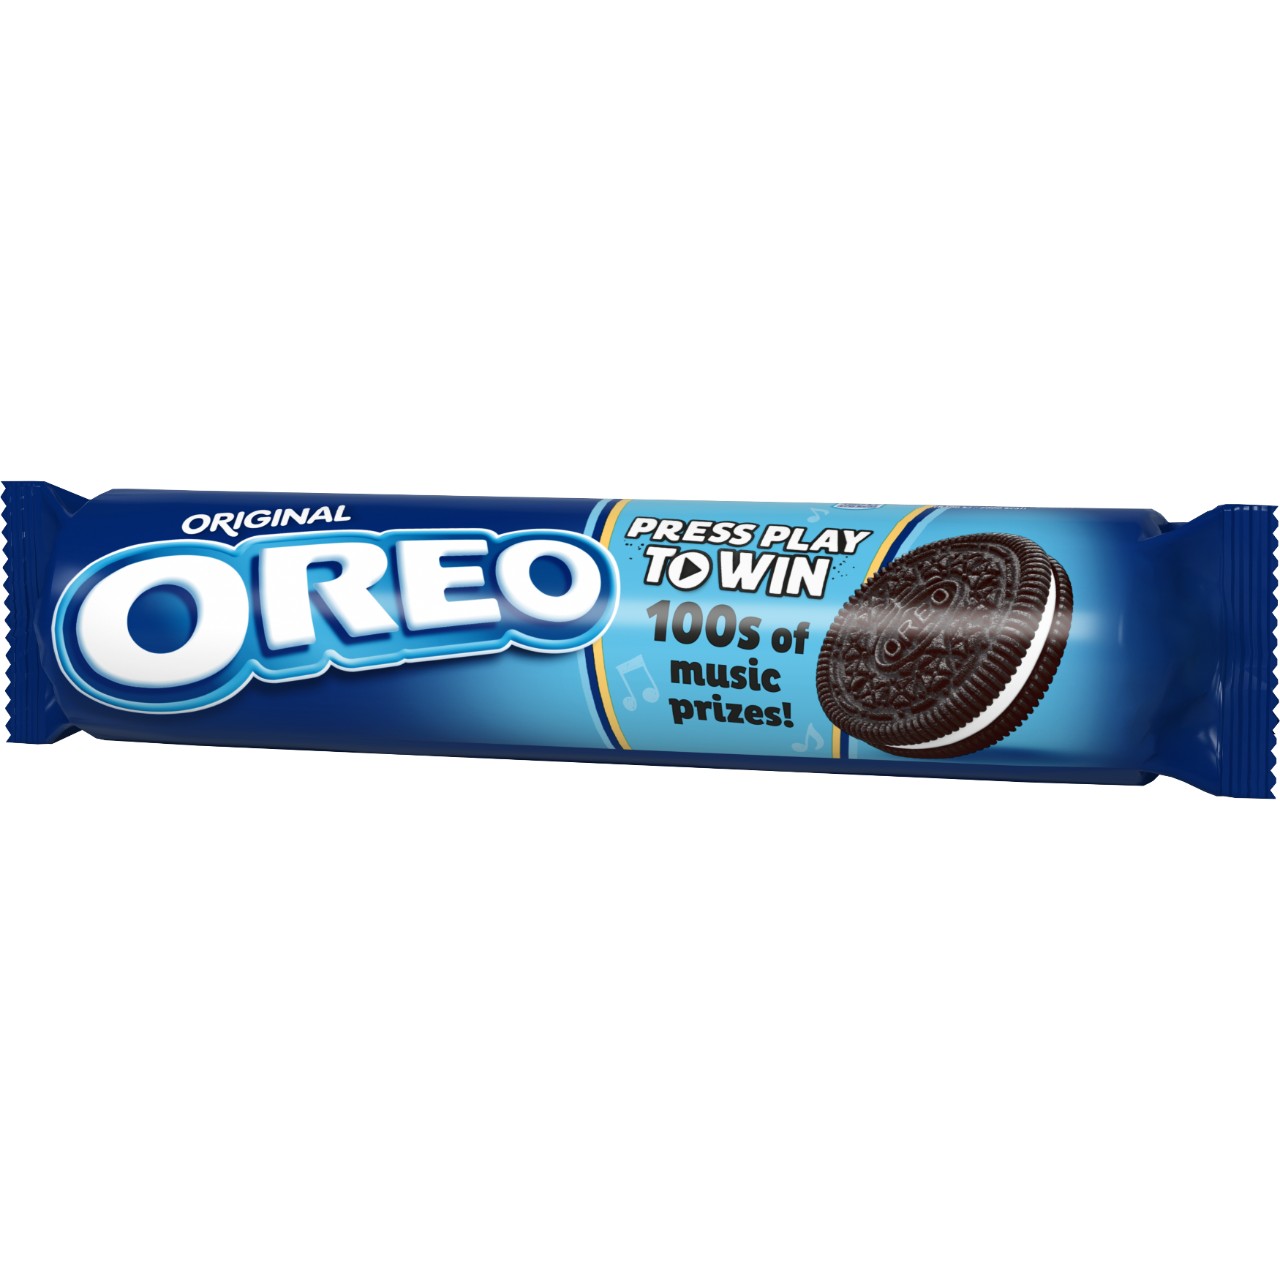 New OREO on-pack promotion, ‘Press Play To Win’